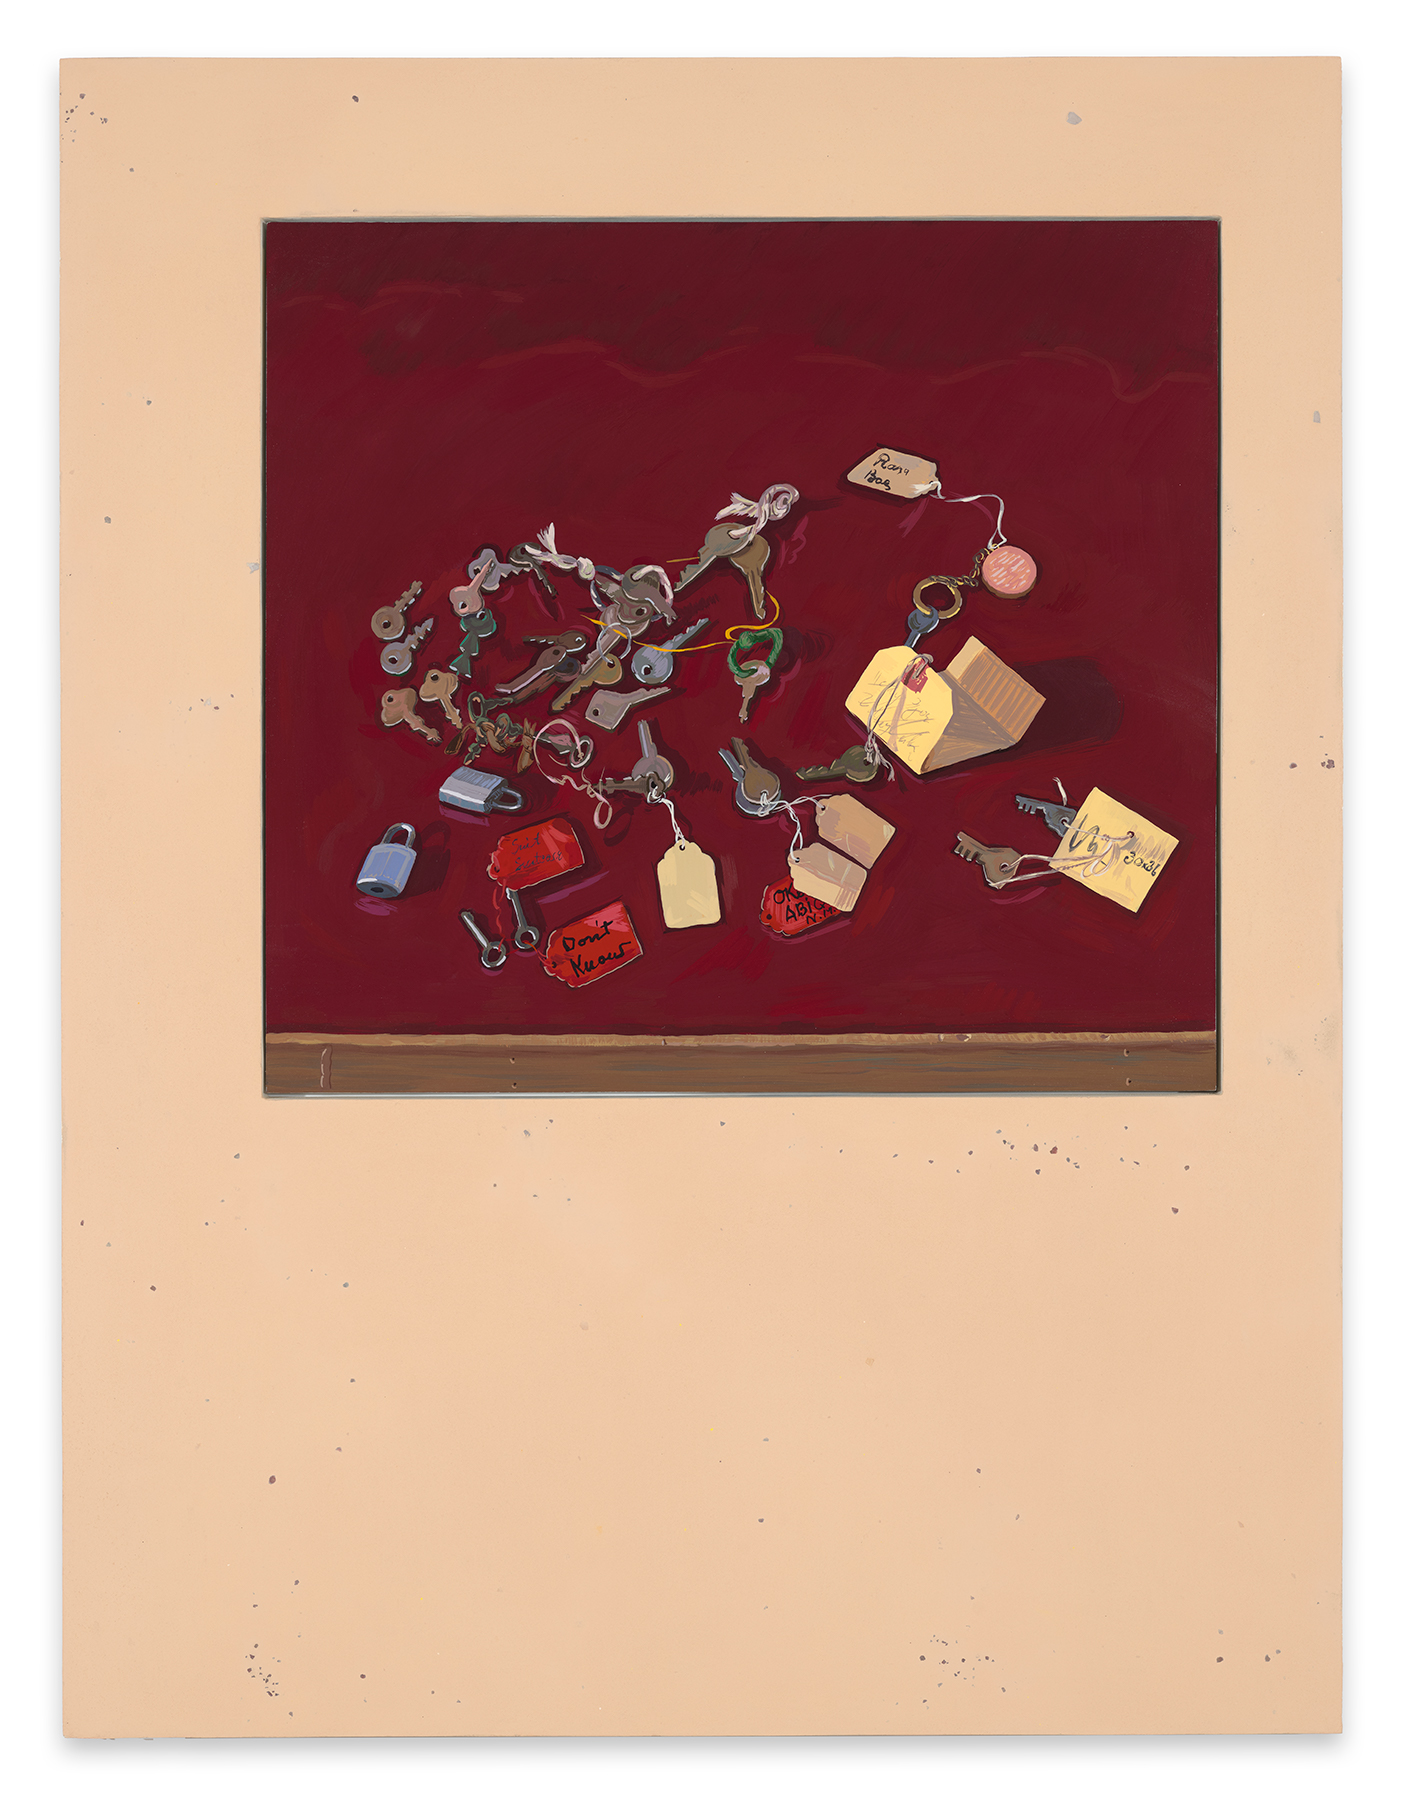 This image shows a painting which is framed in a pigmented pastel cream panel that includes fragments of earth and rocks from the sites where the paintings were made. The painting is a horizontal composition which zooms in on a flat cherry red picture plane displaying a collection of multiple sets of keys in an array of colors, shapes and sizes, there are also 2 little metal locks.  Some of the keys are attached to handwritten labels, some just with strings. There is an odd sense of perspective as the keys seem to float on a flat space but also appear to be attached to a surface – which we know is a table because there is a painted strip of wood running along the base of the composition anchoring the painting.  While the painting is composed of brush strokes in rich purples, pinks, reds, creams, browns, grays, slivers and various shades of brass, the light source illuminating from the left flattens all the colors in a Surrealistic way.  In the foreground is a small sliver toned key attached with a red paper handwritten label, which reads 'Don’t Know.'